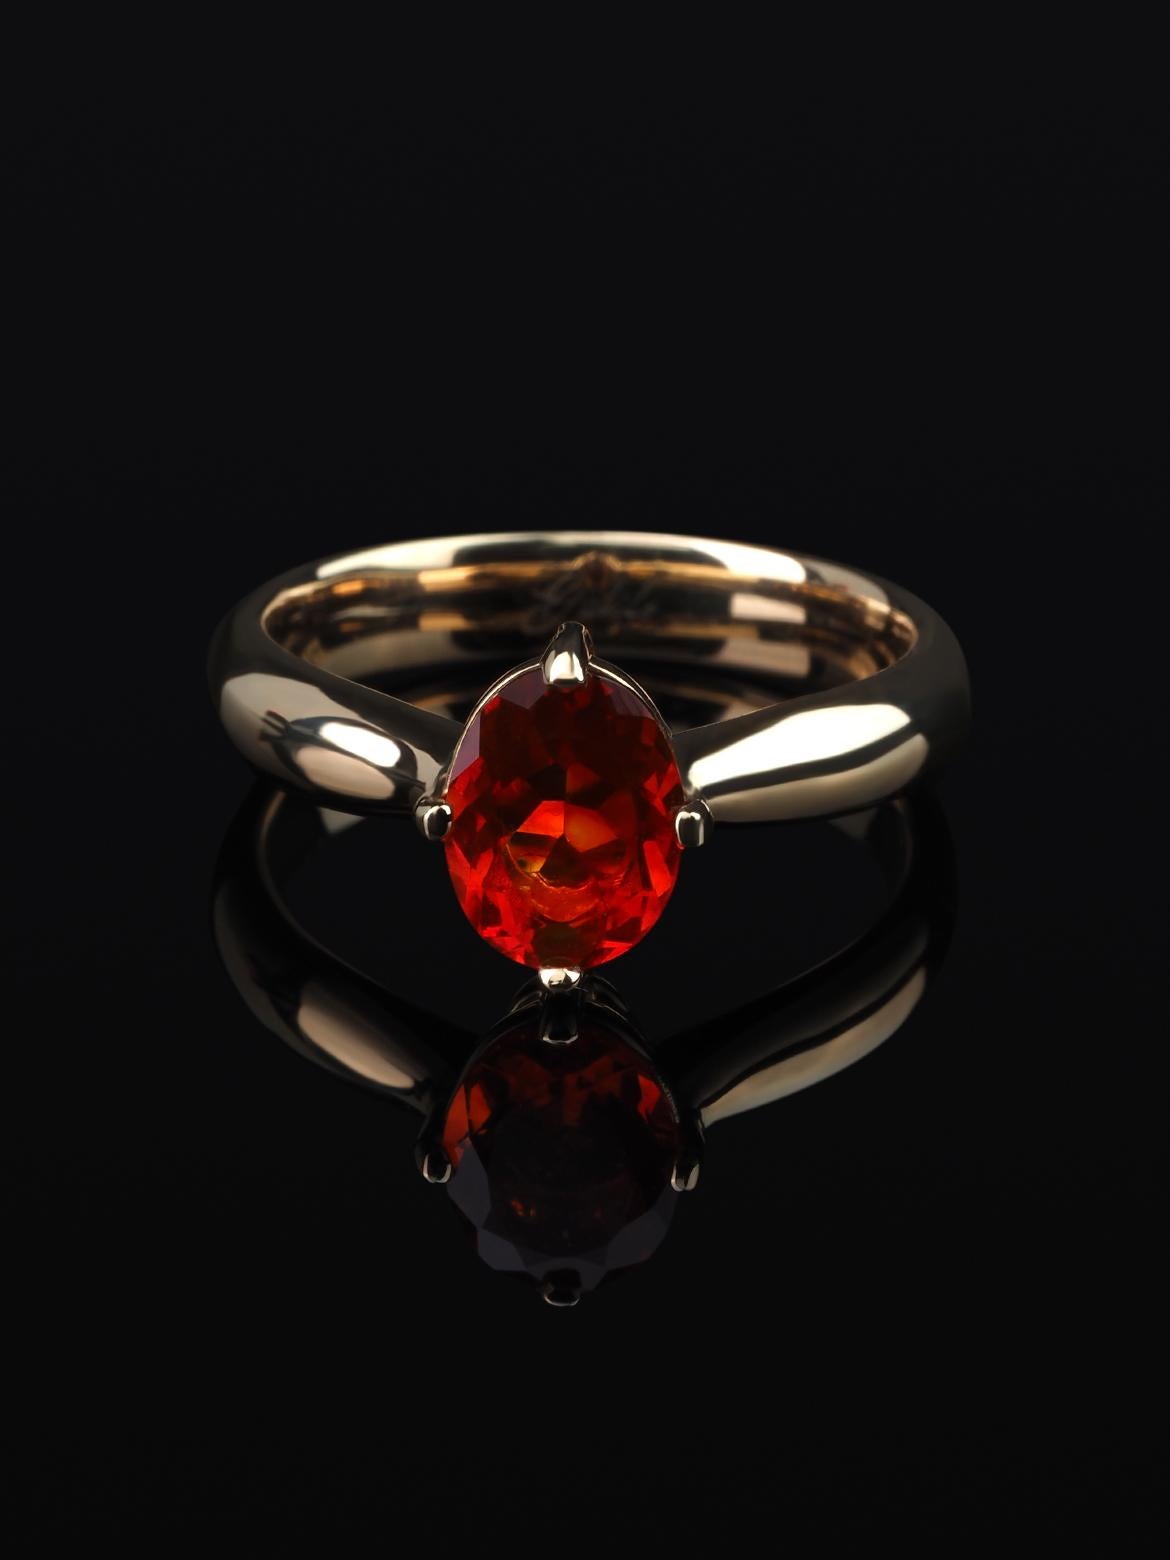 14K yellow gold with natural Fire Opal
opal origin - Mexico  
opal measurements - 0.12 x 0.24 x 0.31 in / 3 x 6 x 8 mm
opal weight - 0.7 carats
ring size - 6.25 US
ring weight - 4.35 grams

Cupid collection


We ship our jewelry worldwide – for our